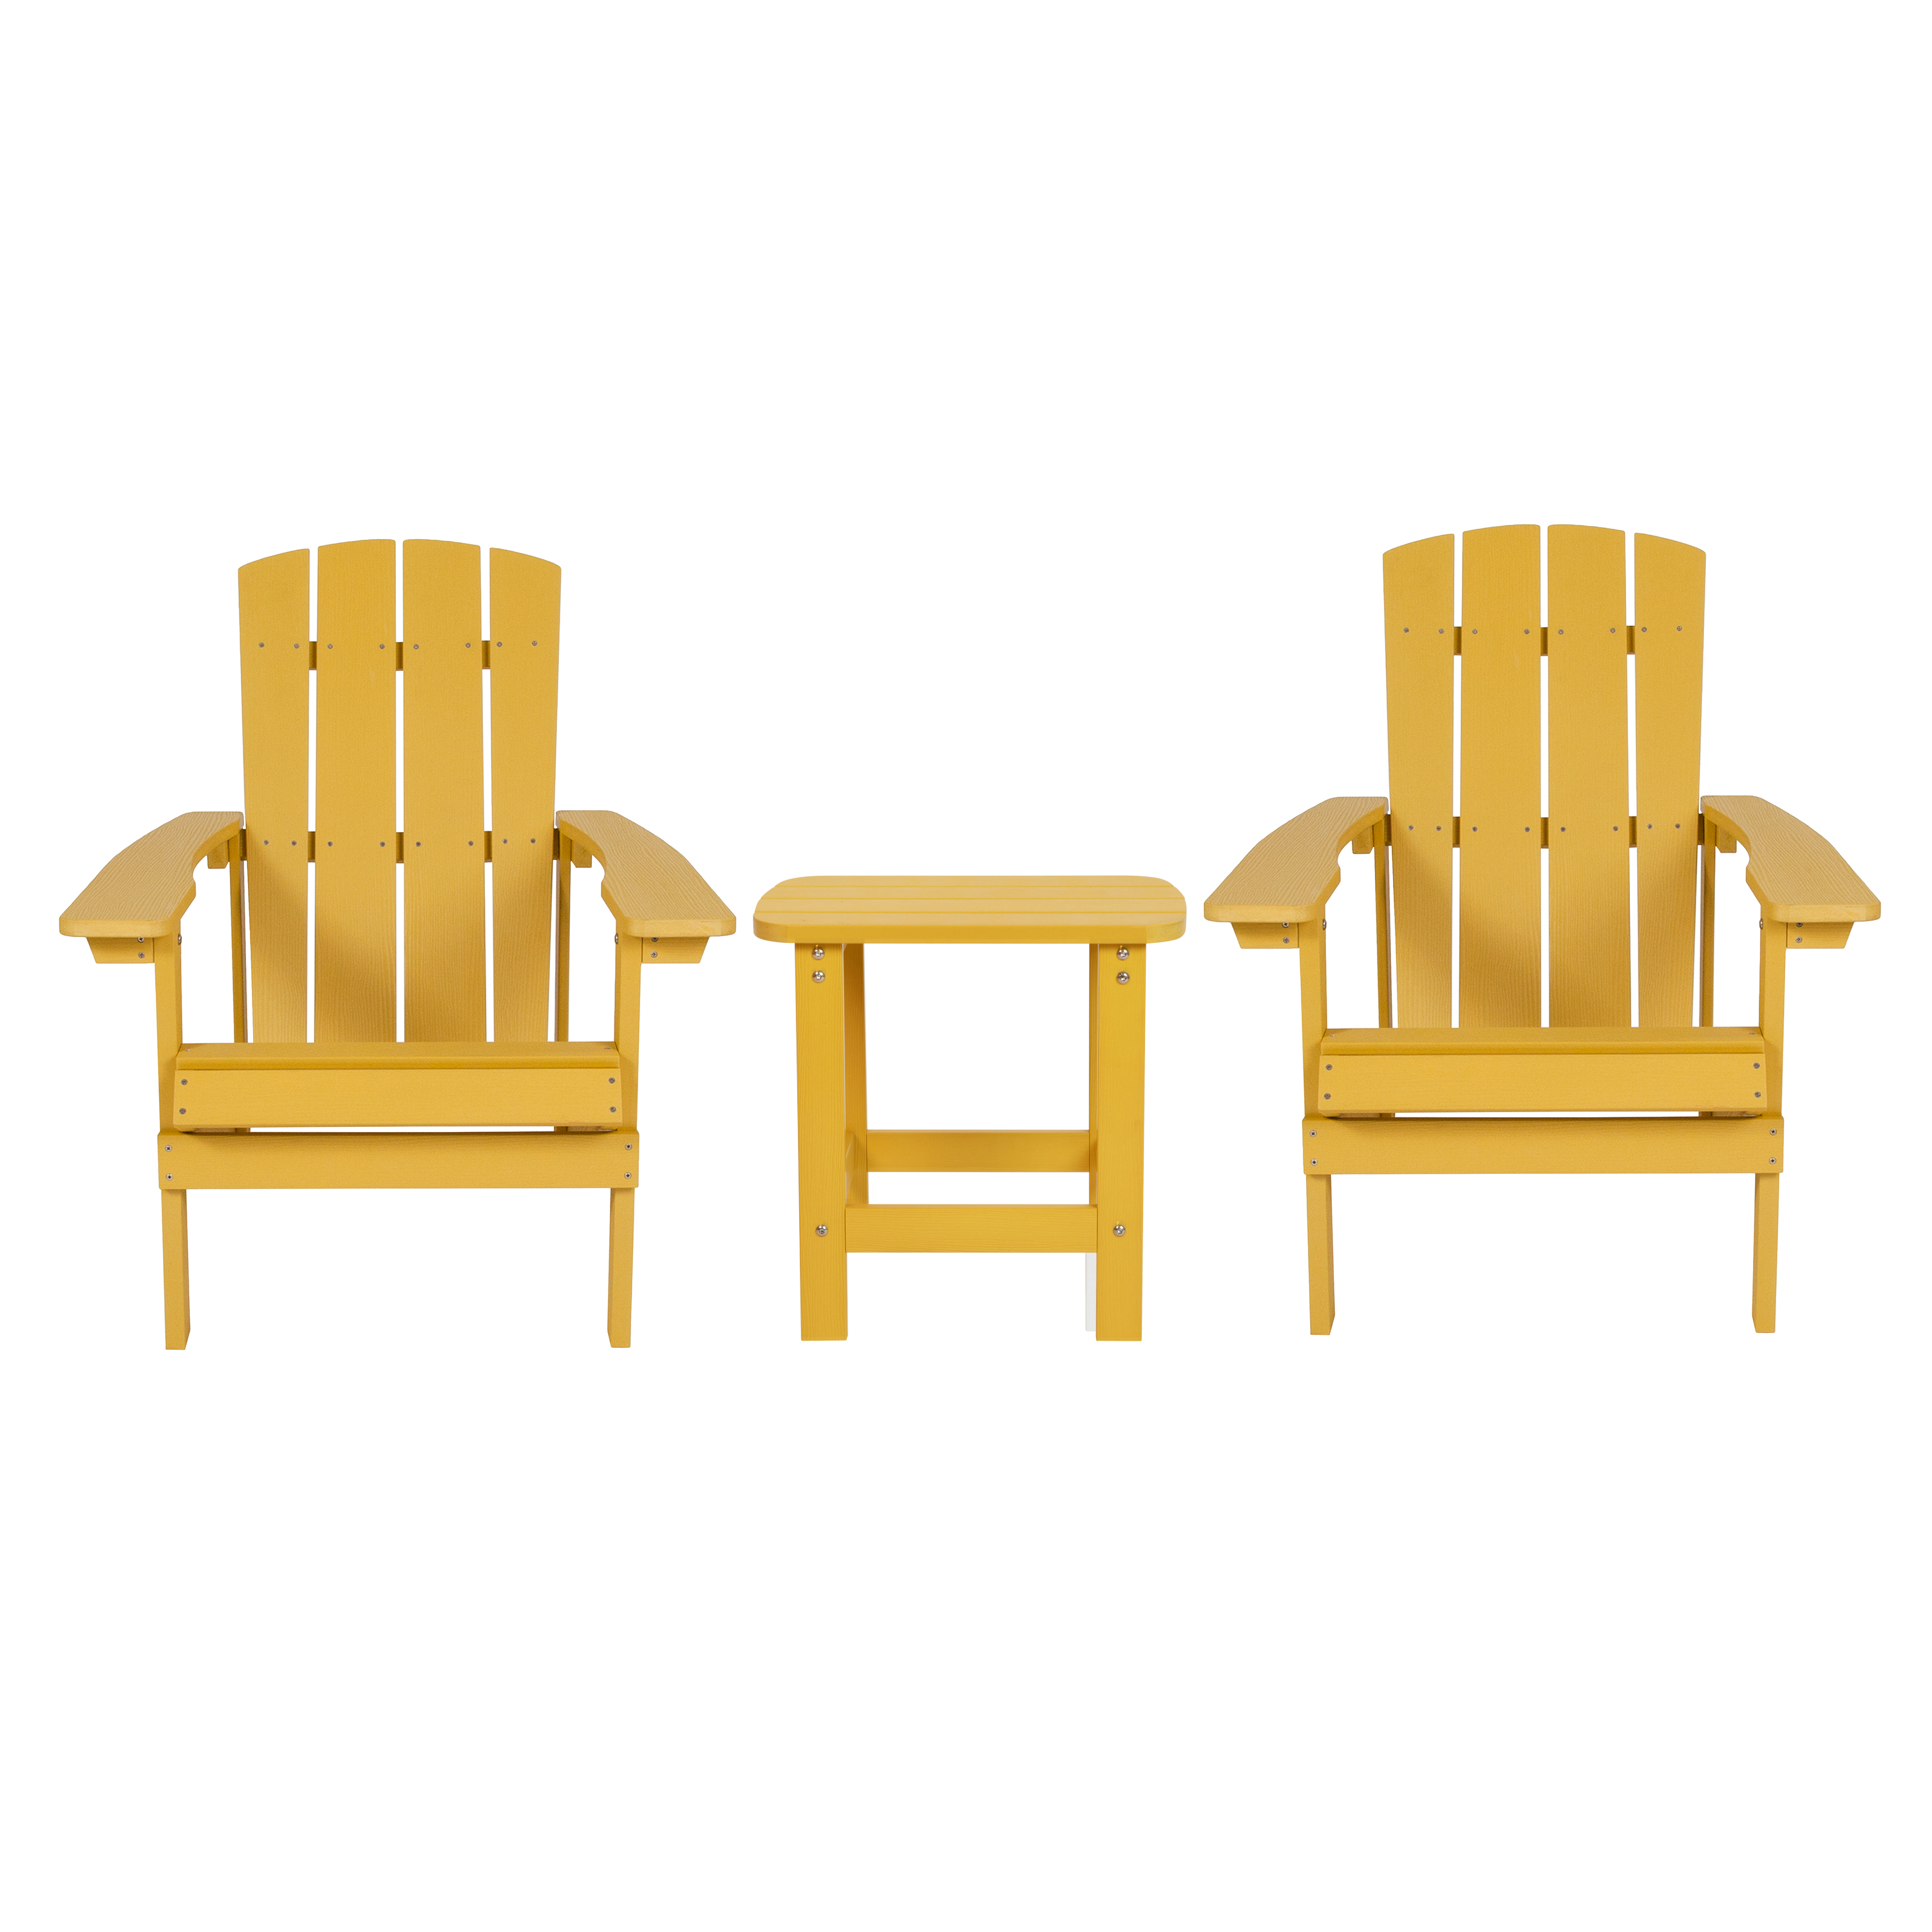 Flash Furniture JJ-C14501-2-T14001-YLW-GG Yellow All-Weather Poly Resin Wood Adirondack Chair with Side Table, 2 Pack